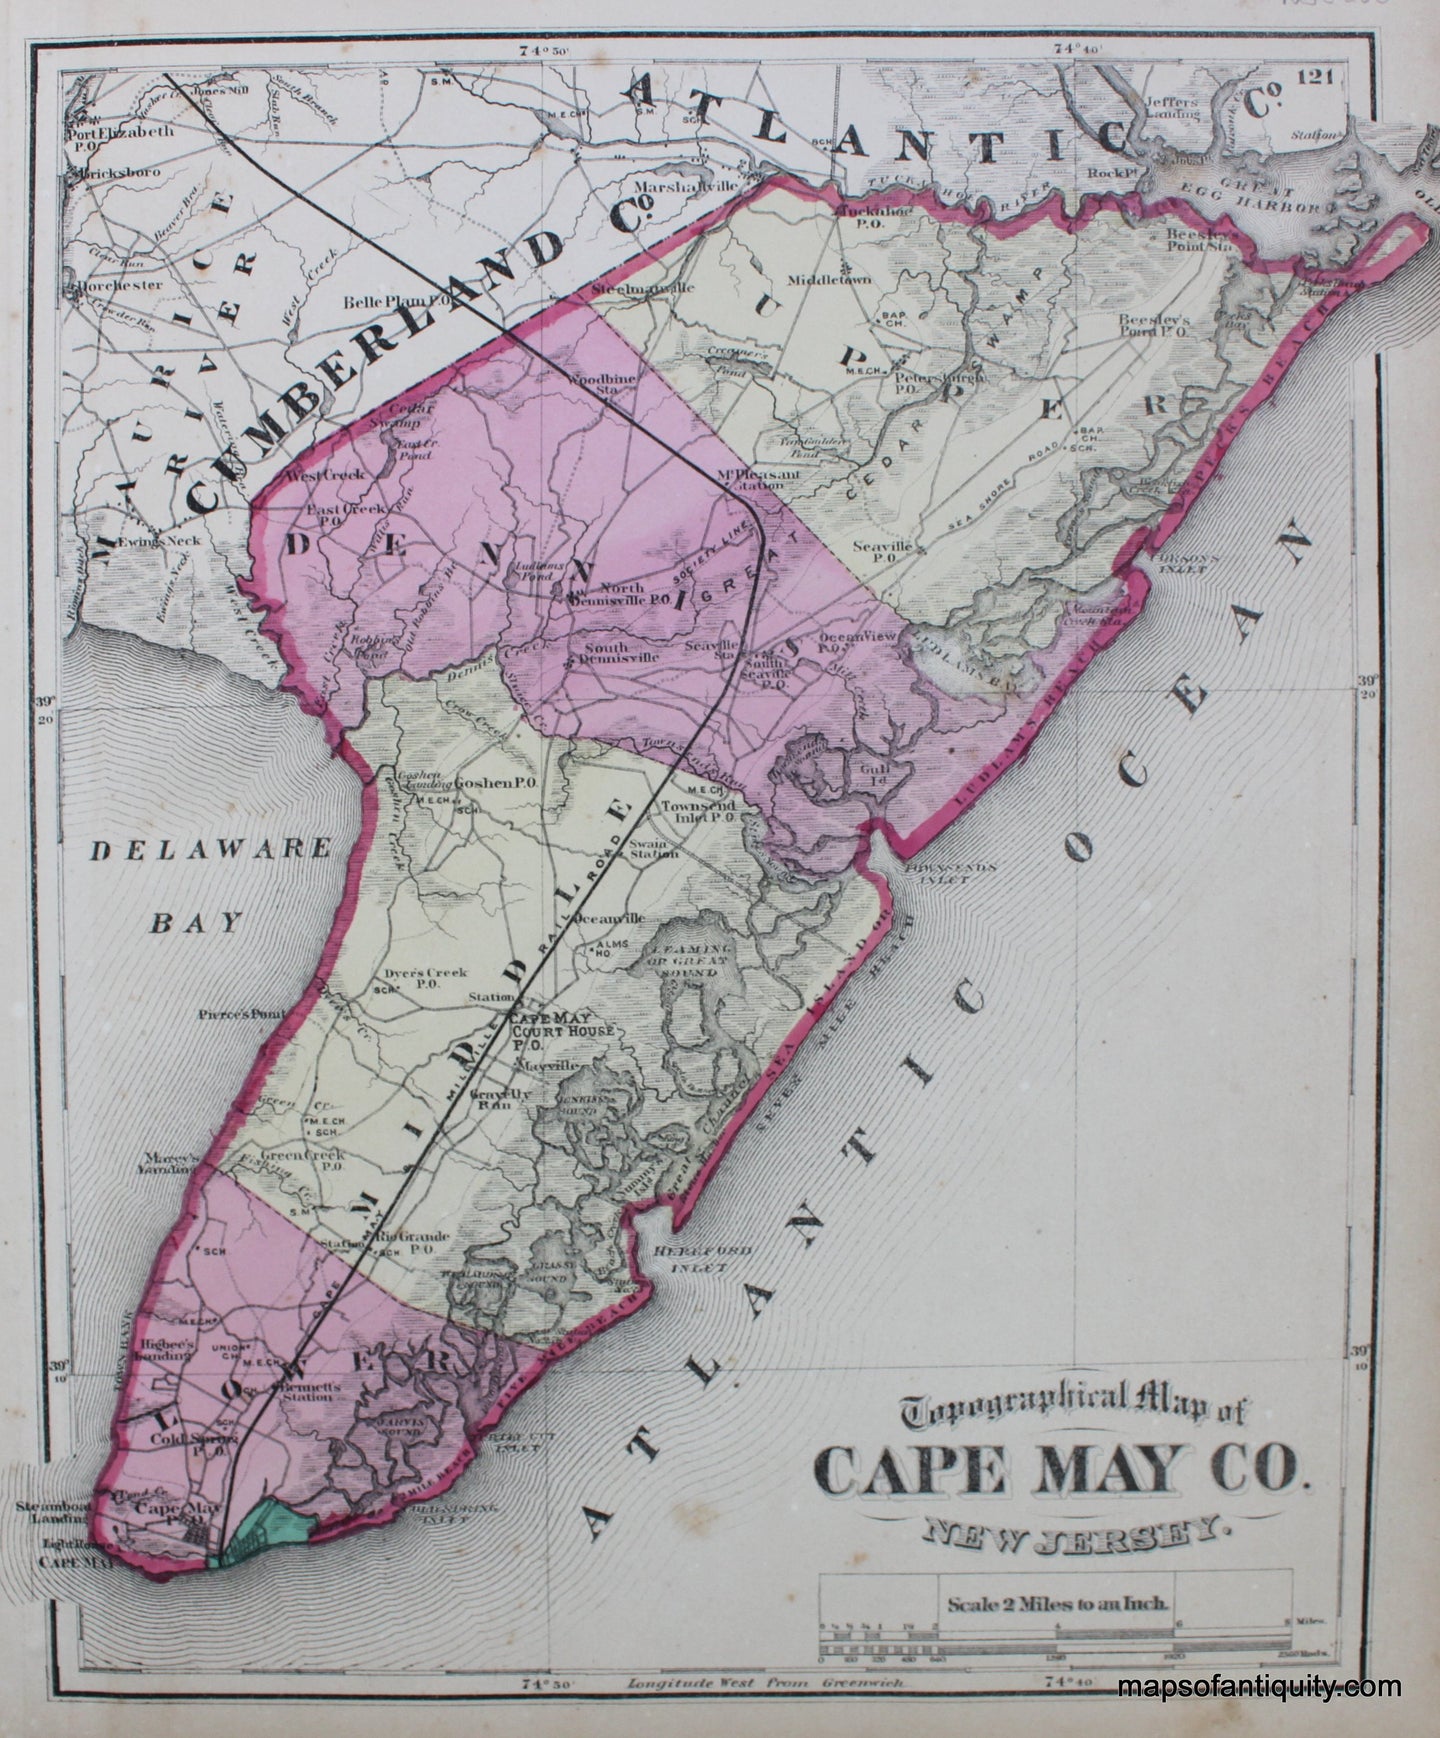 Antique-Hand-Colored-Map-Topographical-Map-of-Cape-May-County-New-Jersey-**********-United-States-New-Jersey-1872-Beers-Maps-Of-Antiquity